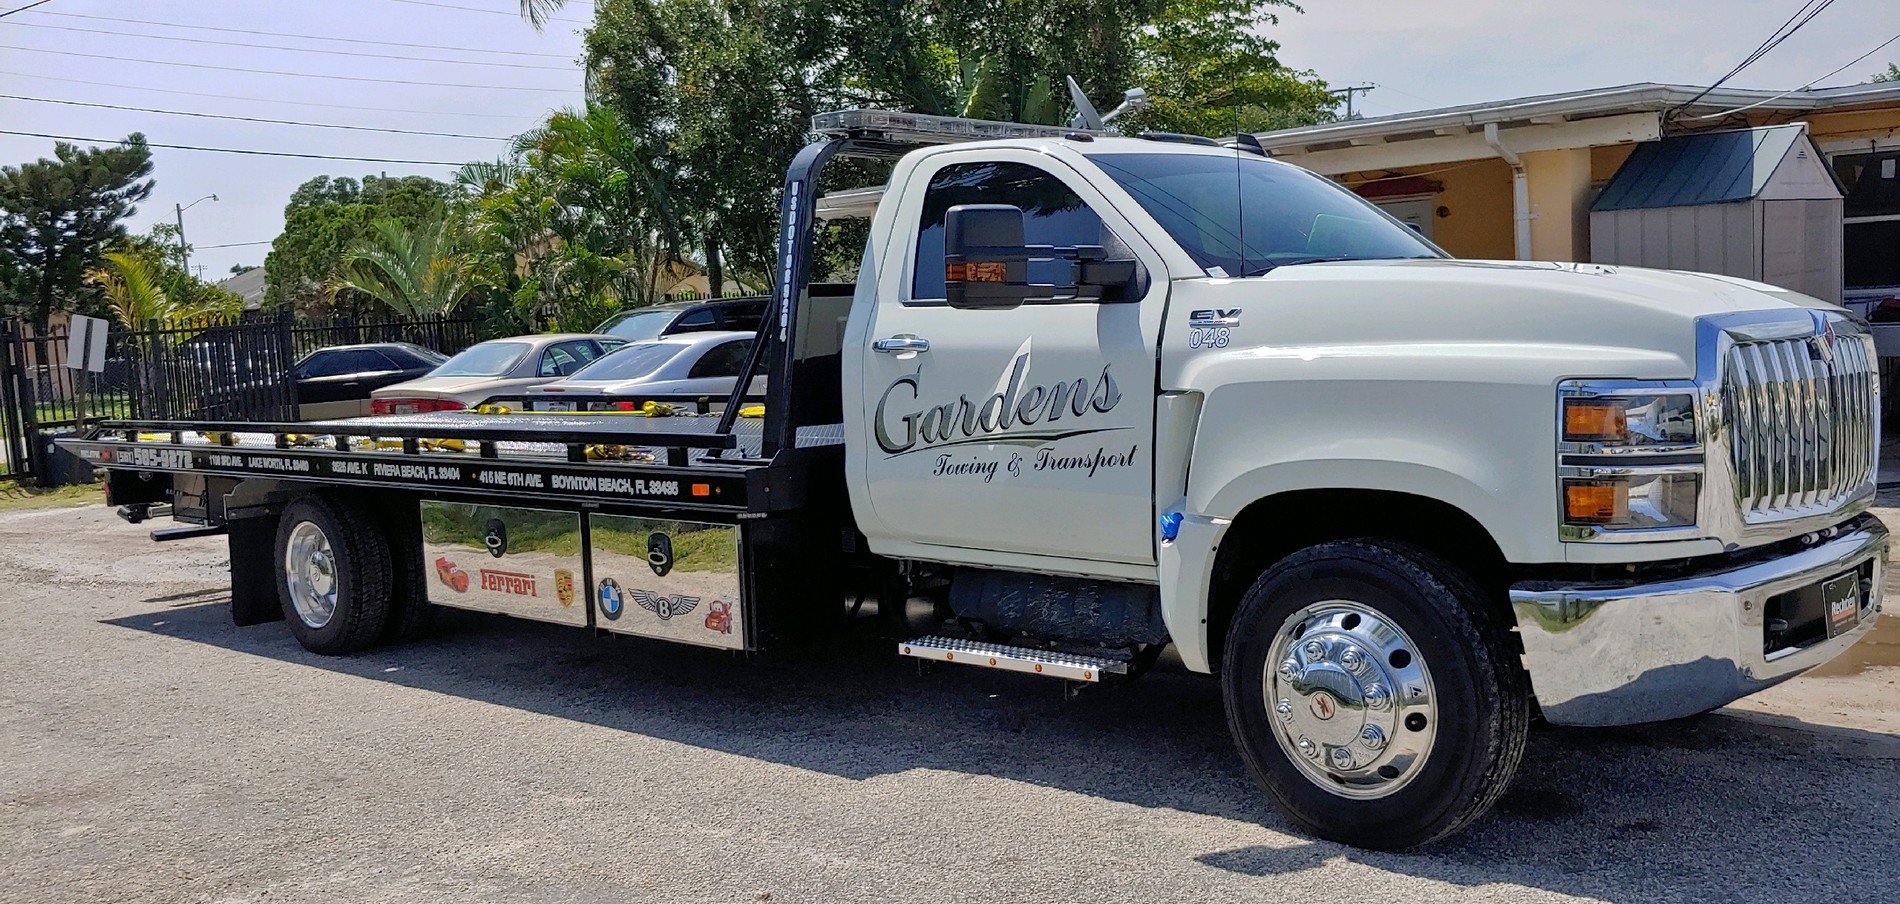 Images Gardens Towing & Transport